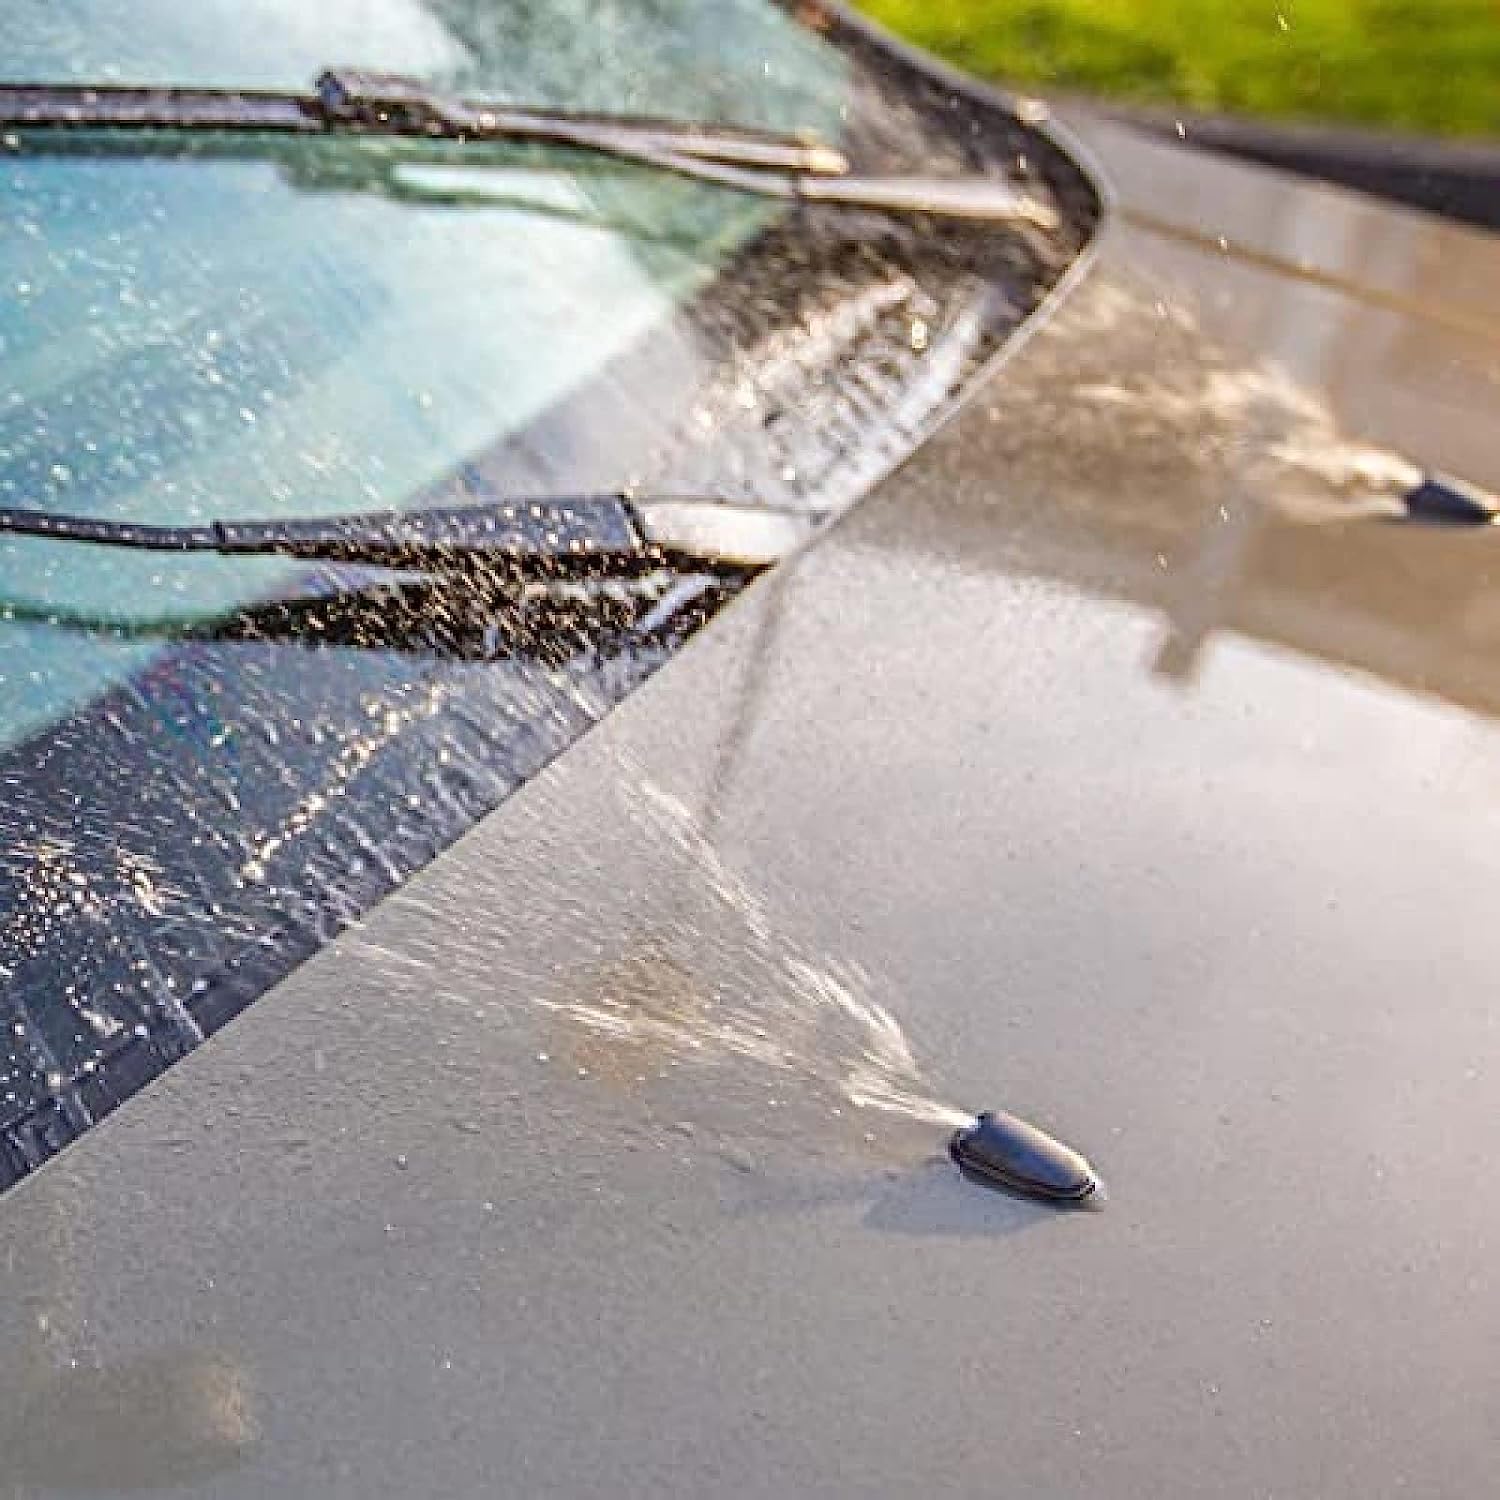 How To Unclog Windshield Washer Nozzle